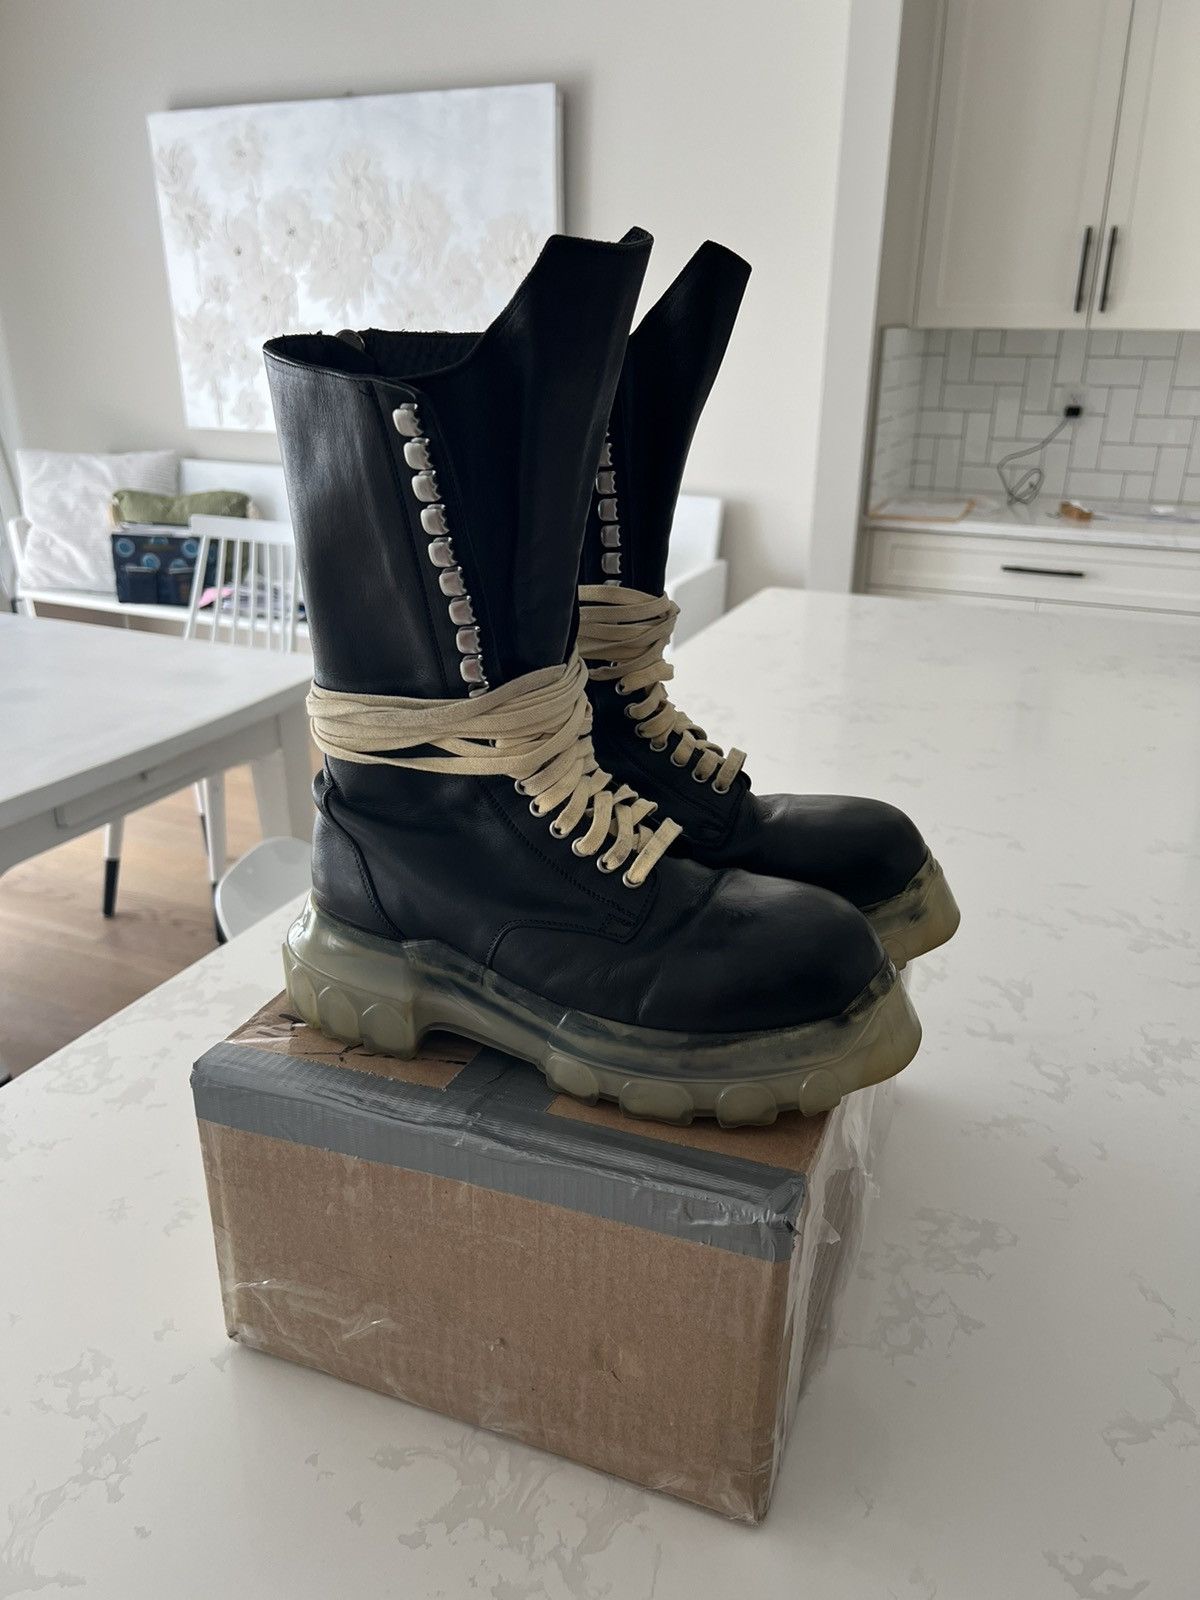 Rick Owens Bozo beetle tractor boot lace up | Grailed